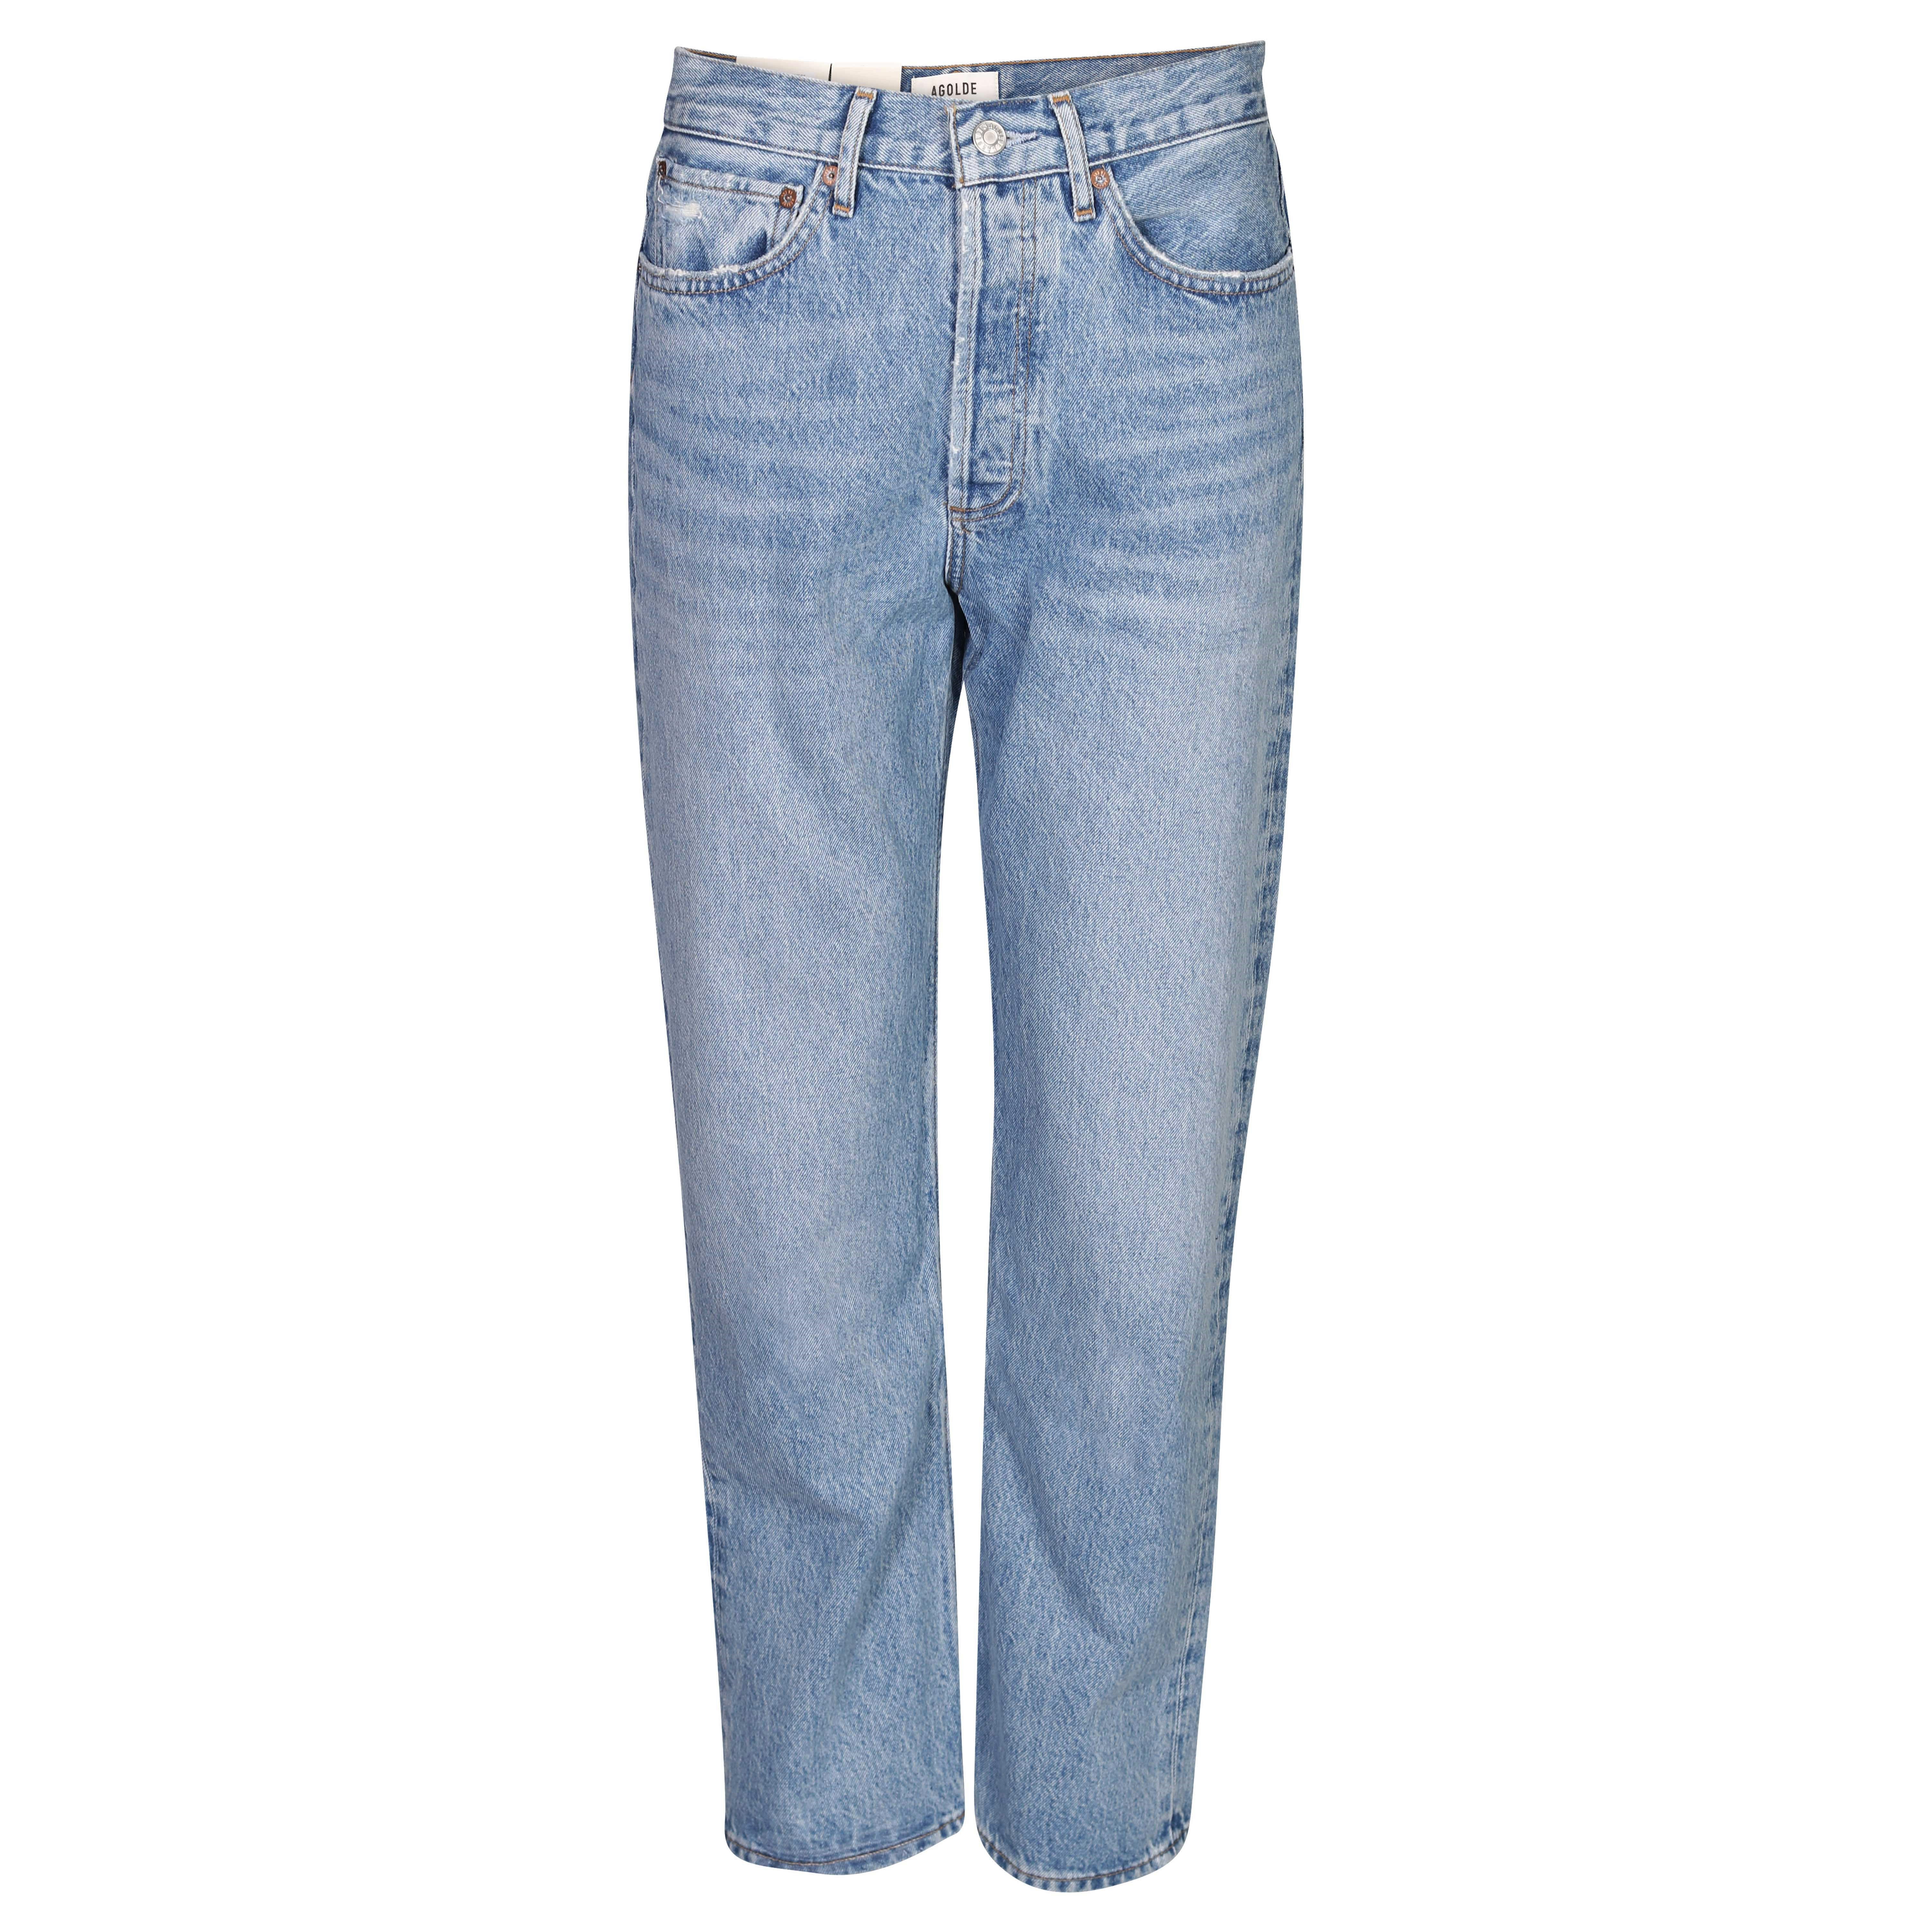 Agolde Jeans 90s Cropped in Scheme Washing